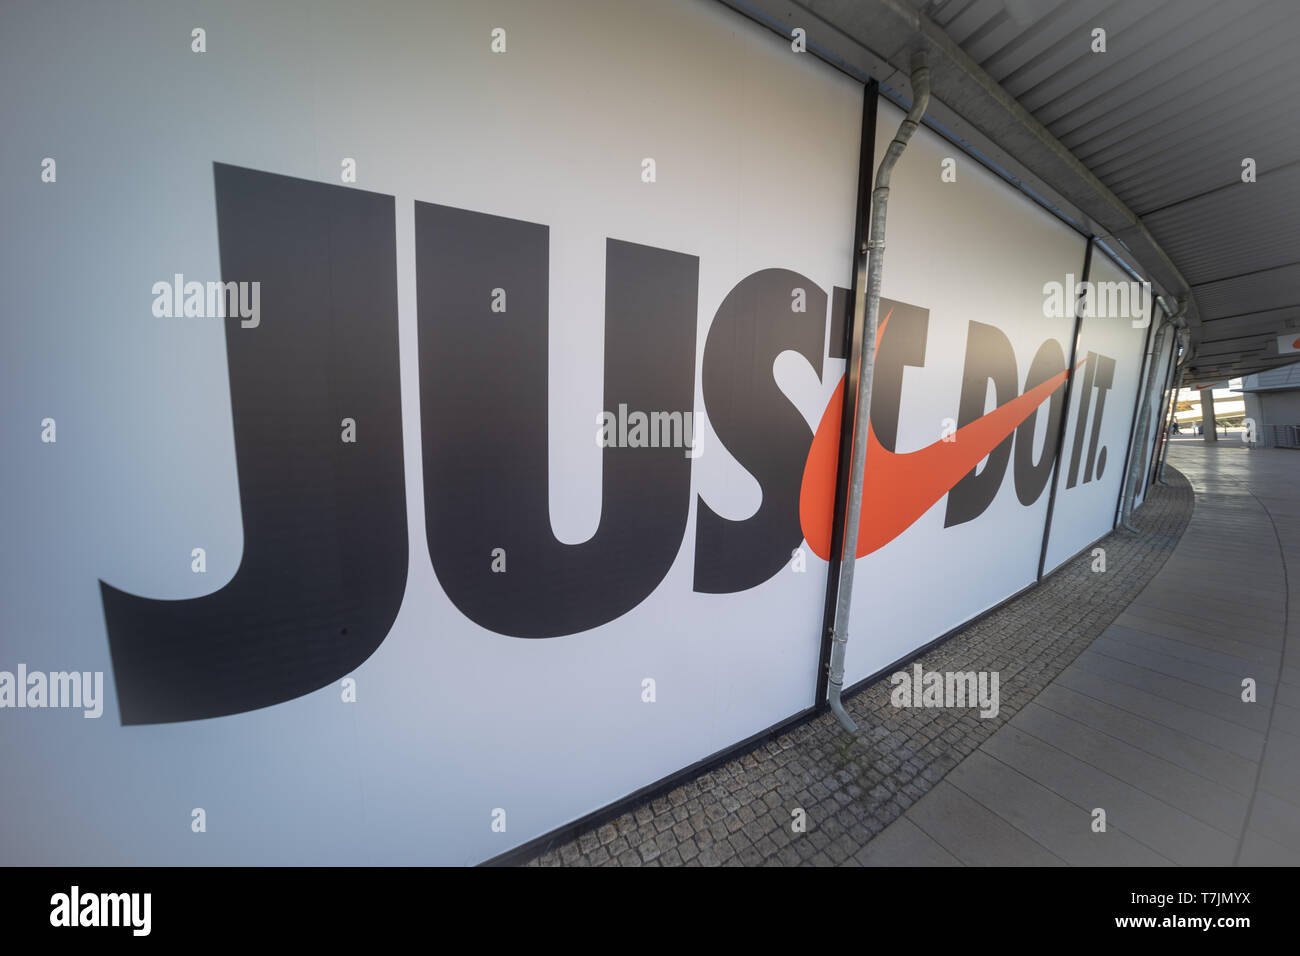 The Nike logo and Nike motto "just do it" on the window display in an  outlet in Wolfsburg, Germany, April 20, 2019 Stock Photo - Alamy